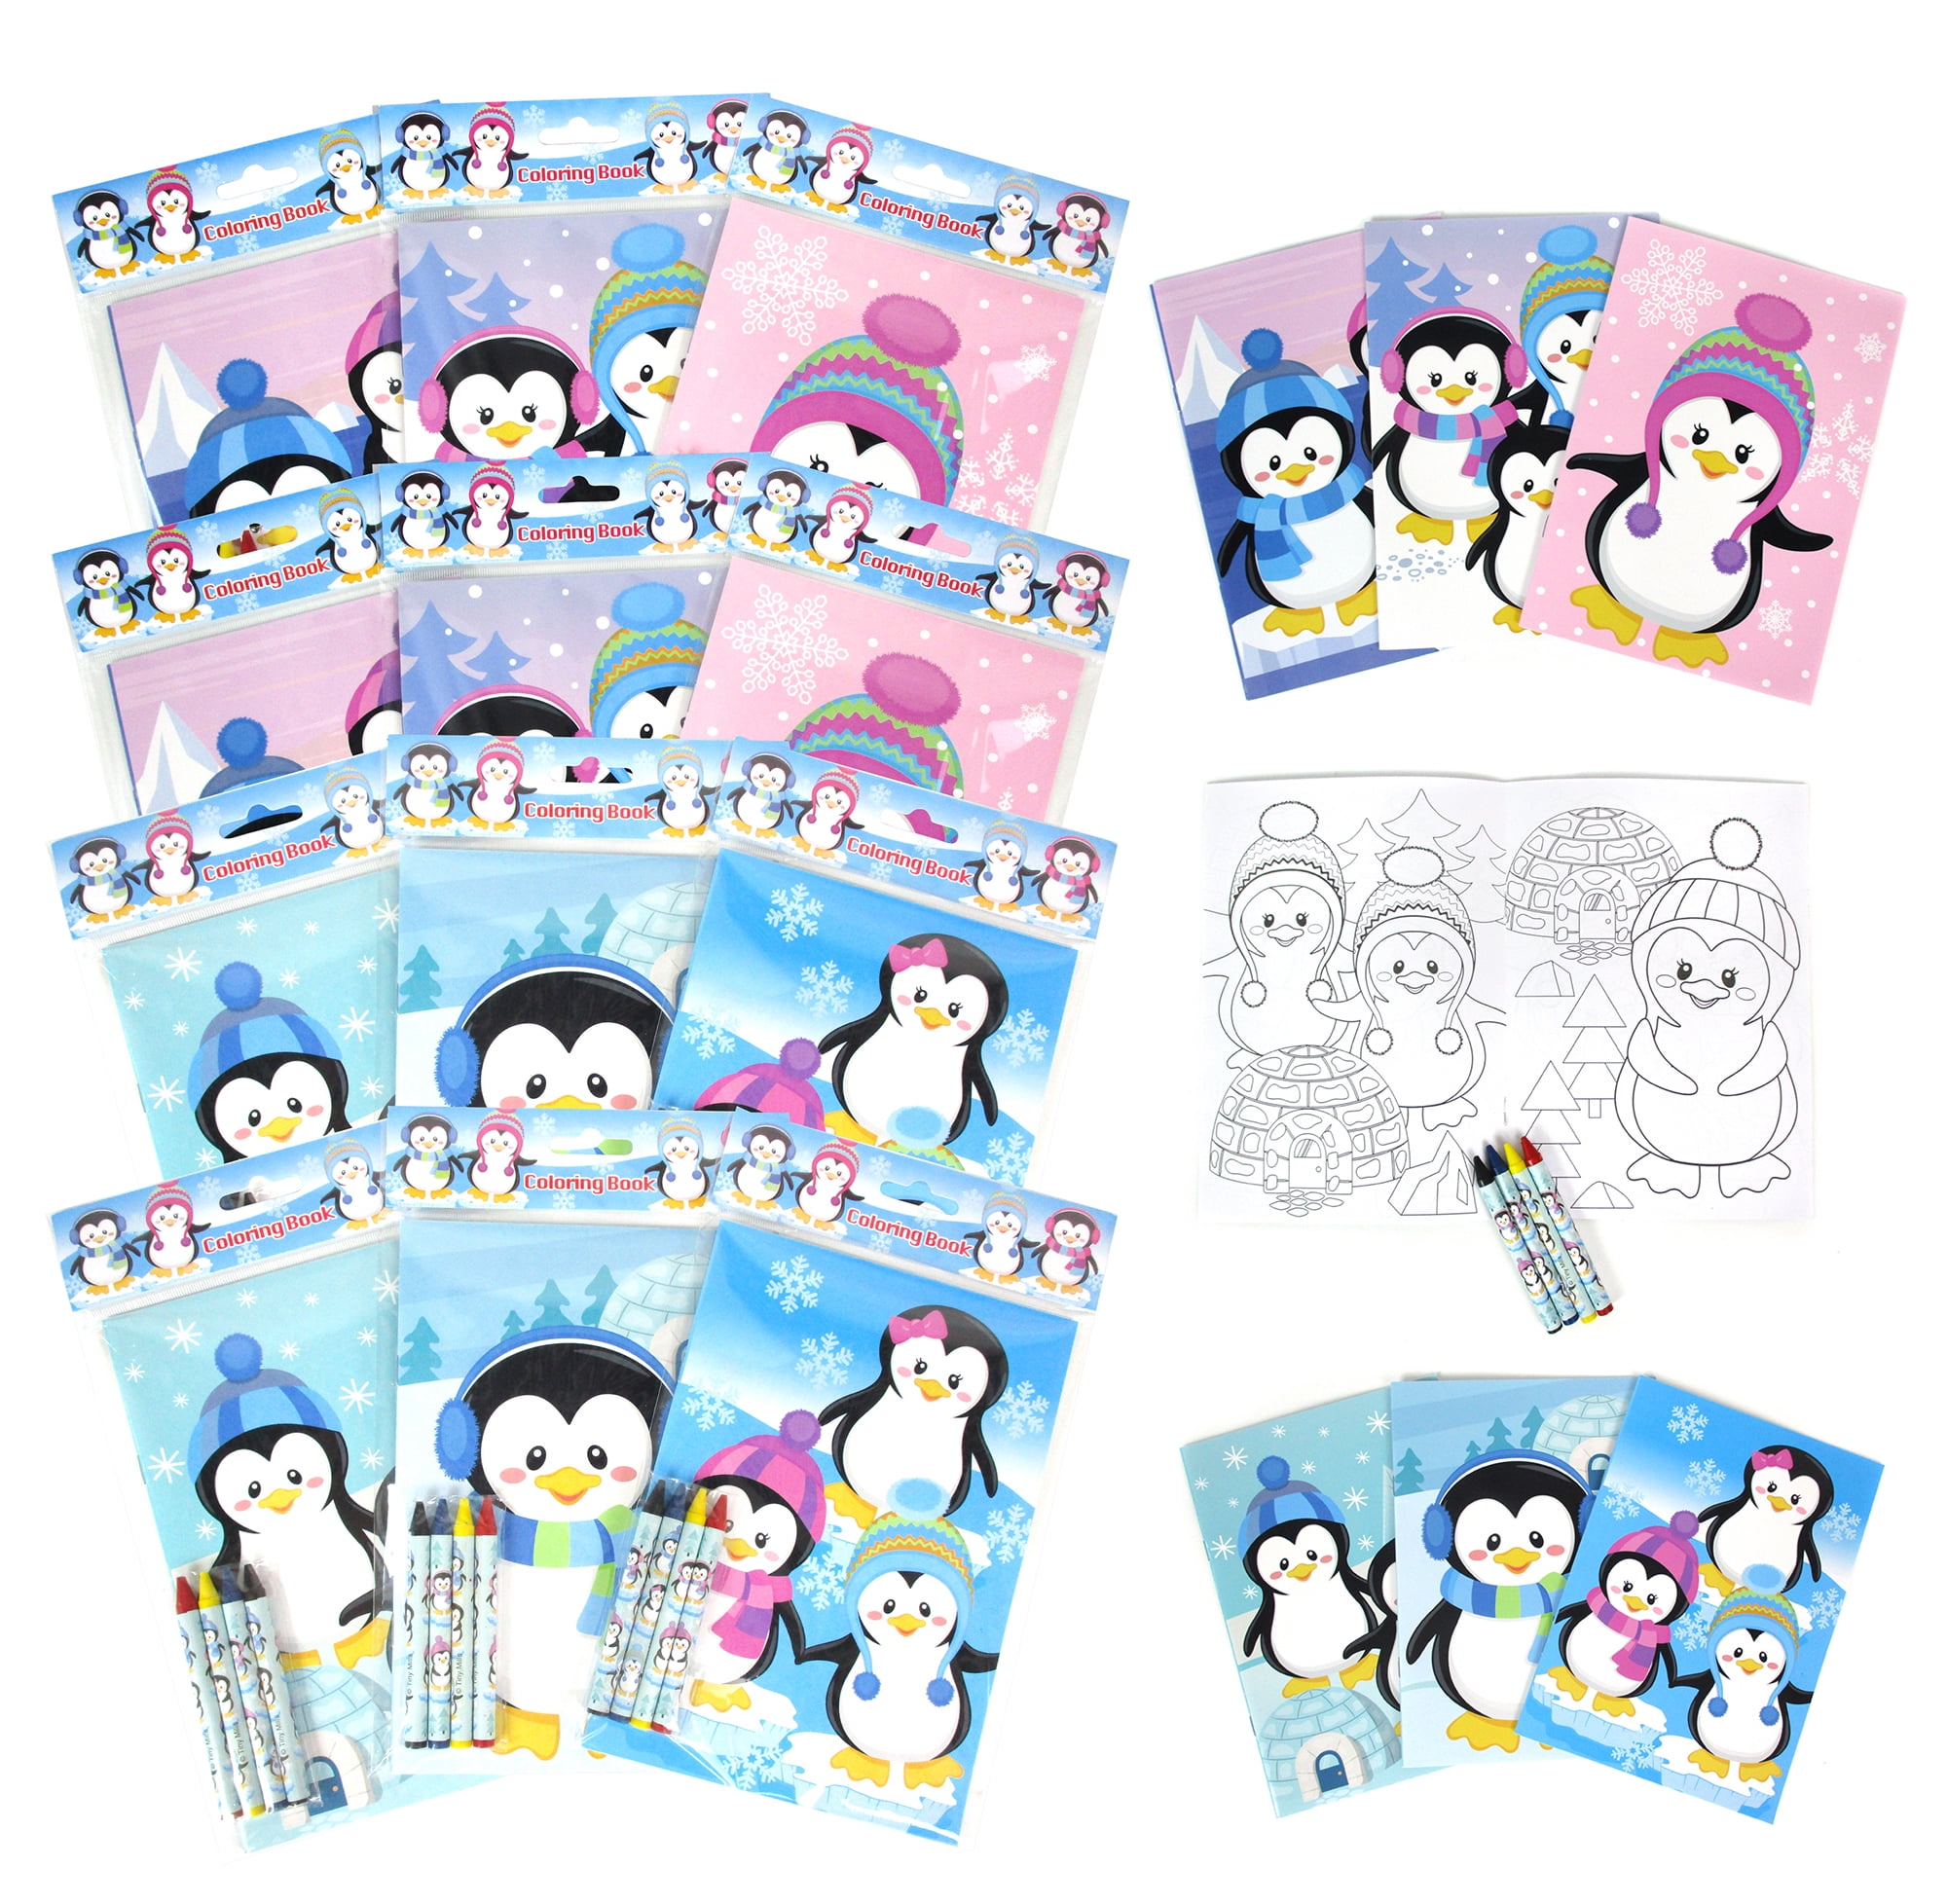  BenLouis 24 Pcs Winter Mini Coloring Books Kids Polar Animals  Penguin Party Favors Activity Books Bulk for Kids Winter Birthday Theme  Holiday Party Goodie Bag Gift Stuffer Classroom Travel Supplies 